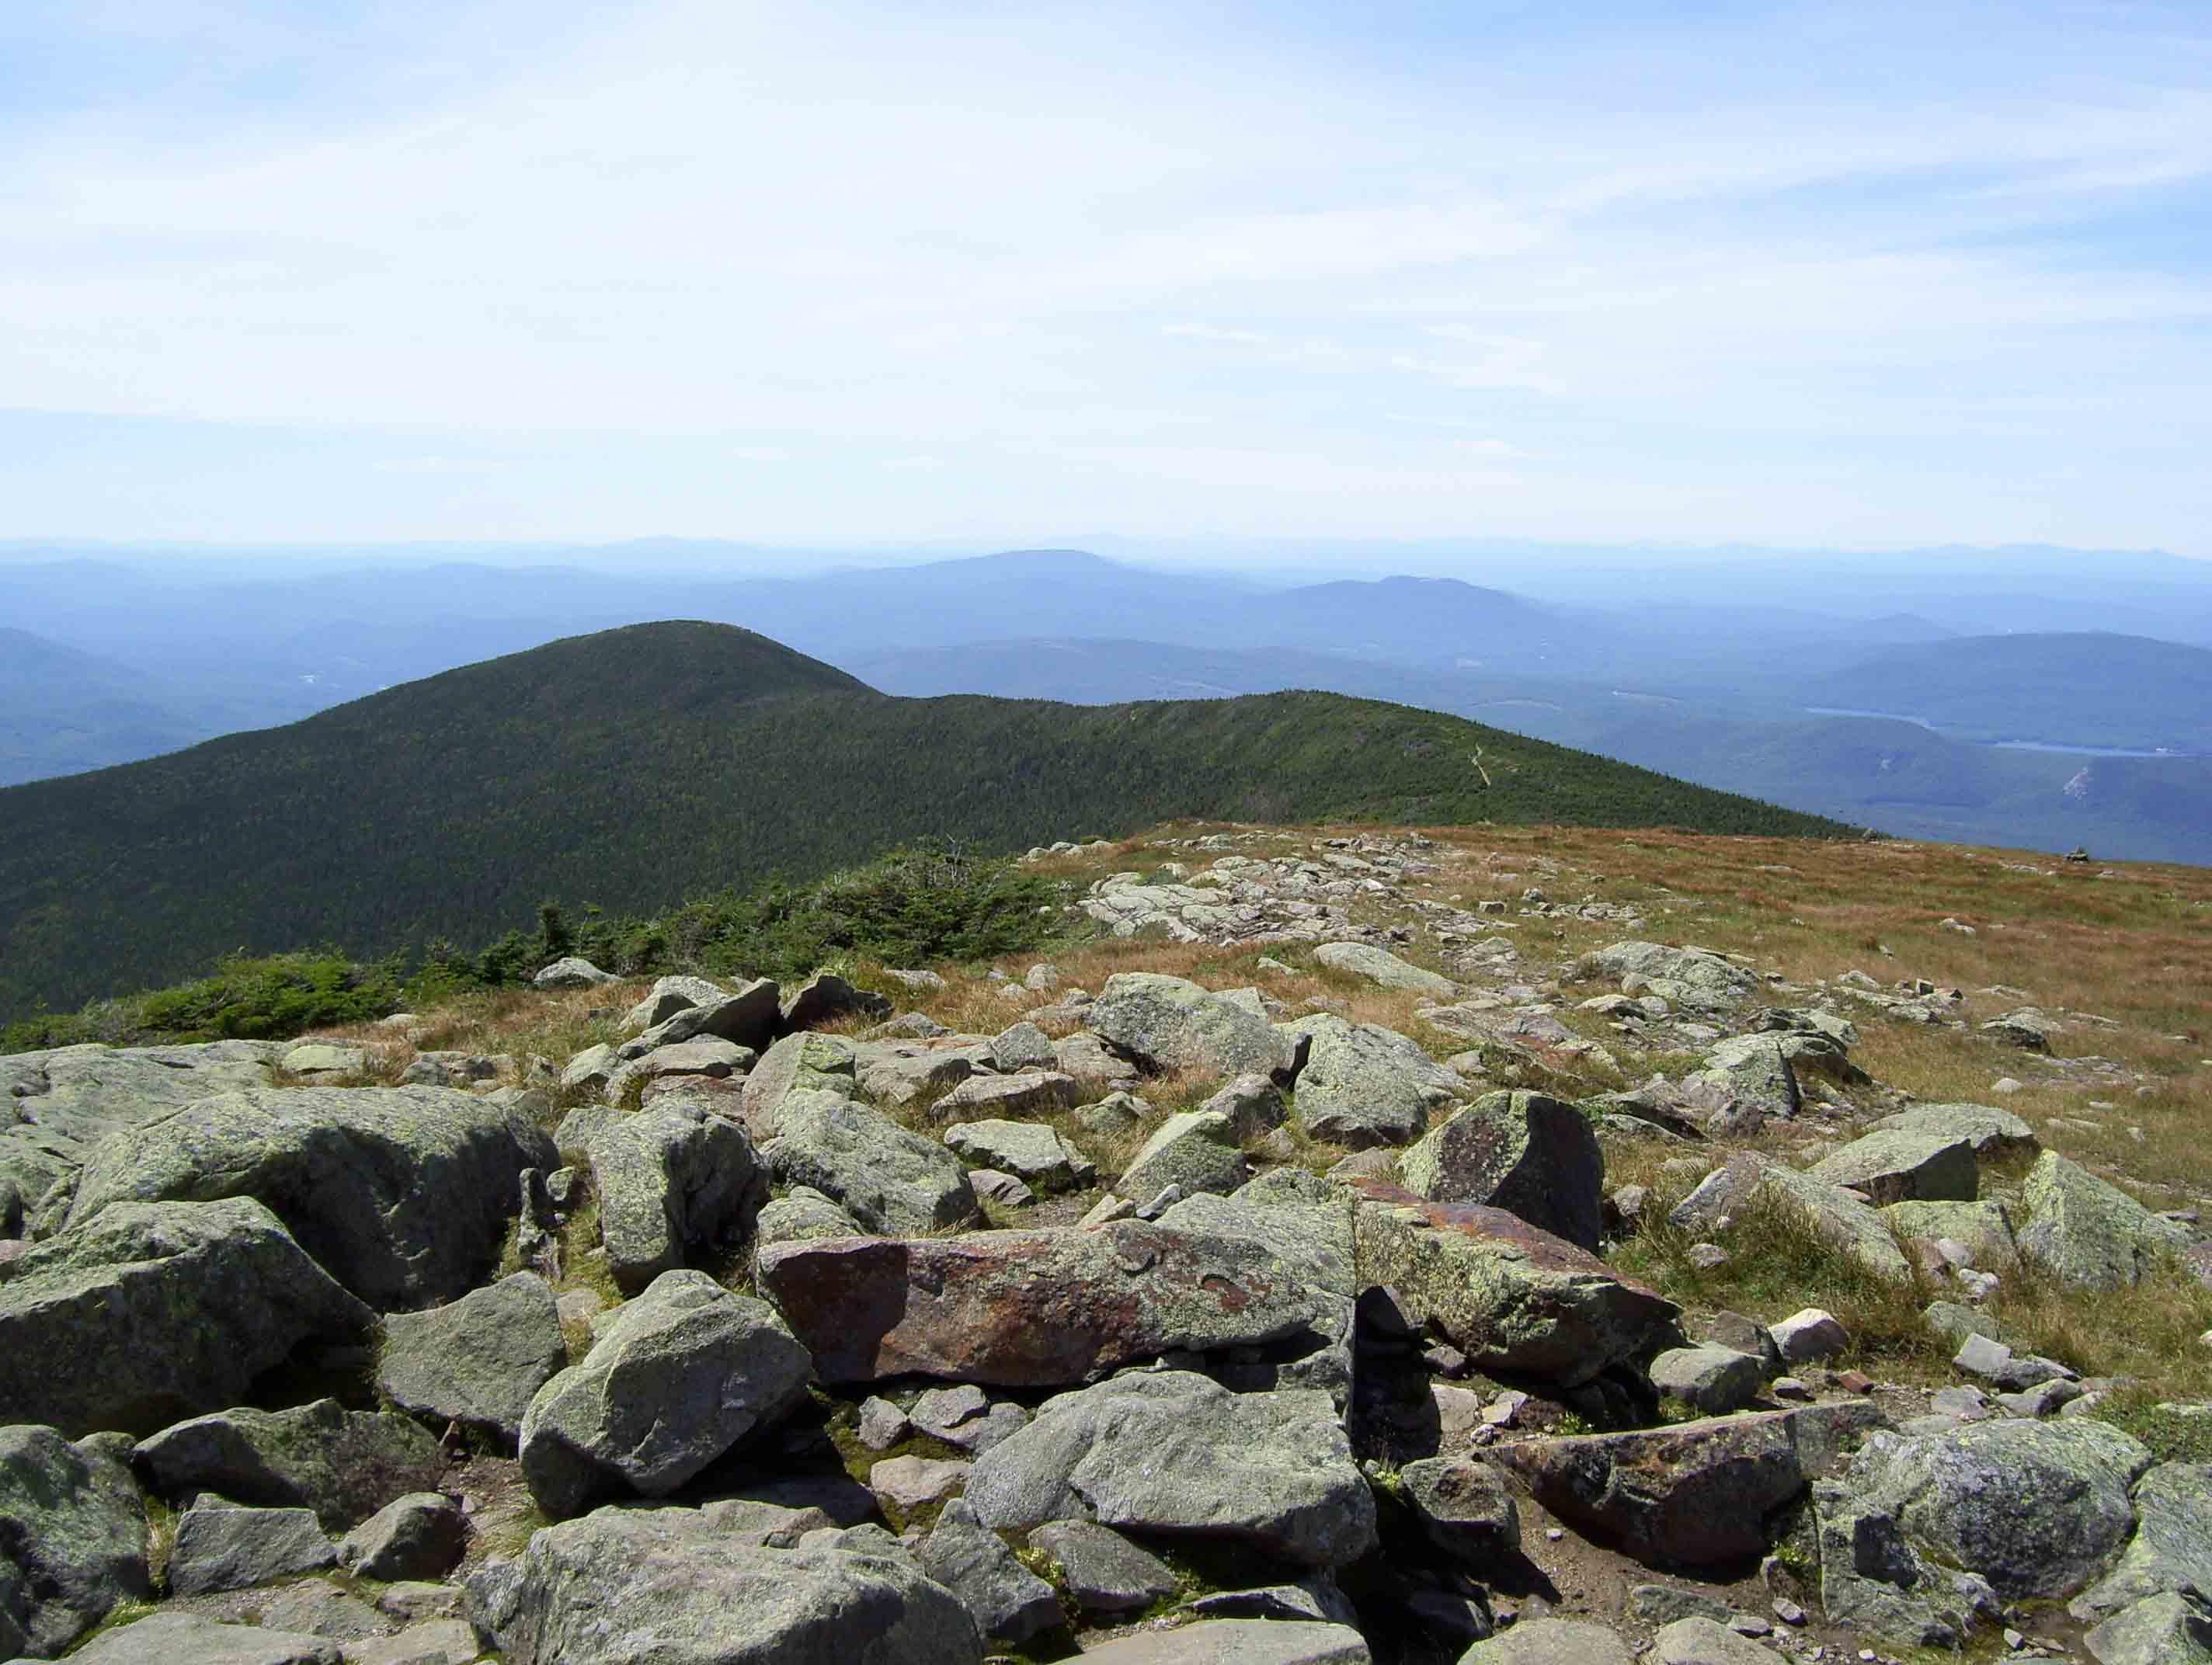 View to the south along the Moosilauke ridge. The peak at the end of the ridge is the South Peak. The AT follows the ridge, then on the north side of the South Peak, turns right and descends over 3000 feet to Glencliff.   Courtesy dlcul@conncoll.edu